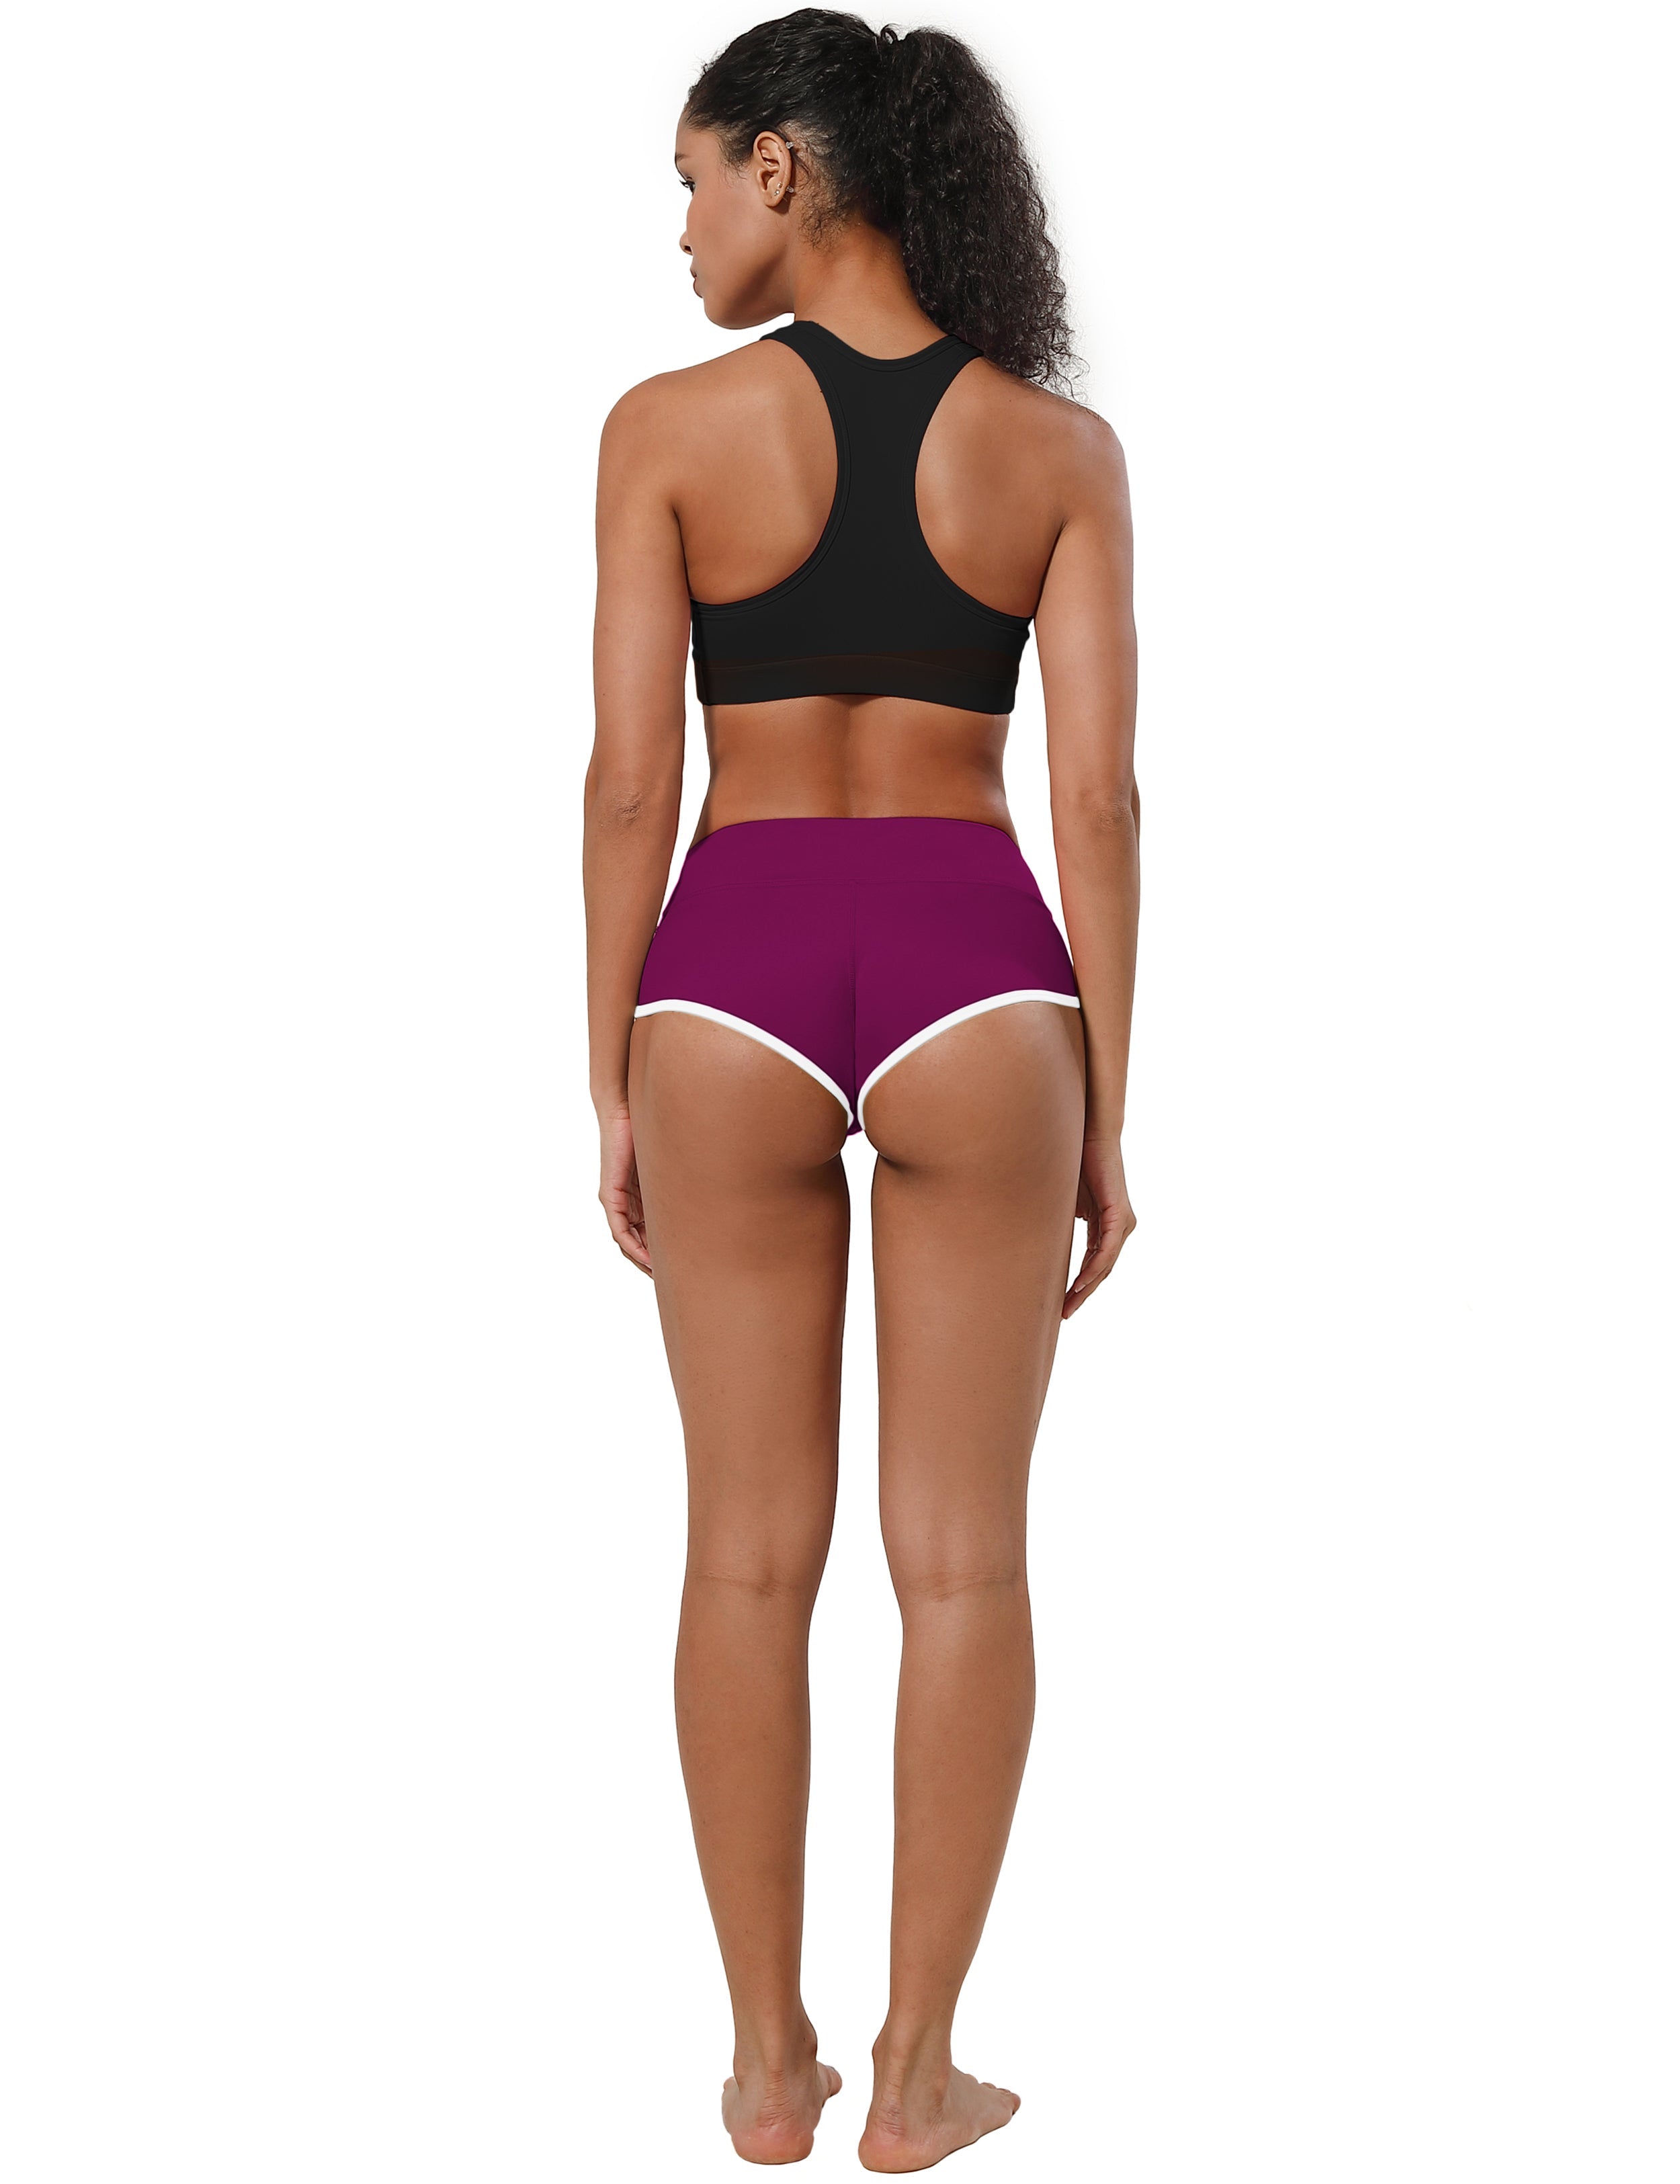 Sexy Booty Pilates Shorts grapevine Sleek, soft, smooth and totally comfortable: our newest sexy style is here. Softest-ever fabric High elasticity High density 4-way stretch Fabric doesn't attract lint easily No see-through Moisture-wicking Machine wash 75%Nylon/25%Spandex